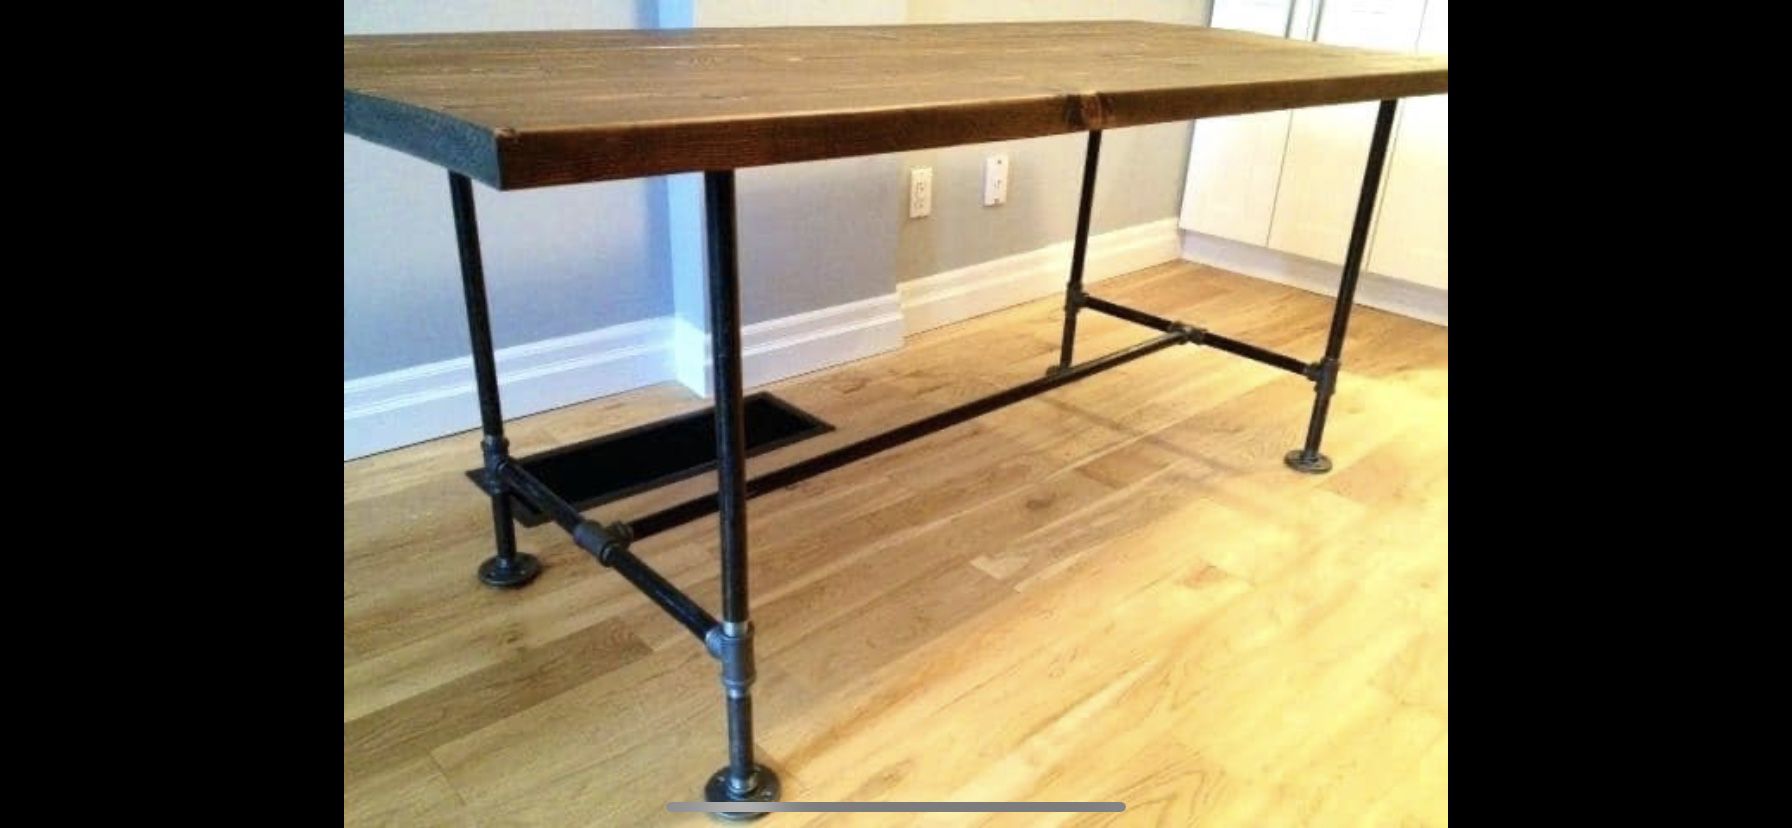 Beautiful, barely used farmhouse style dining table. 72”